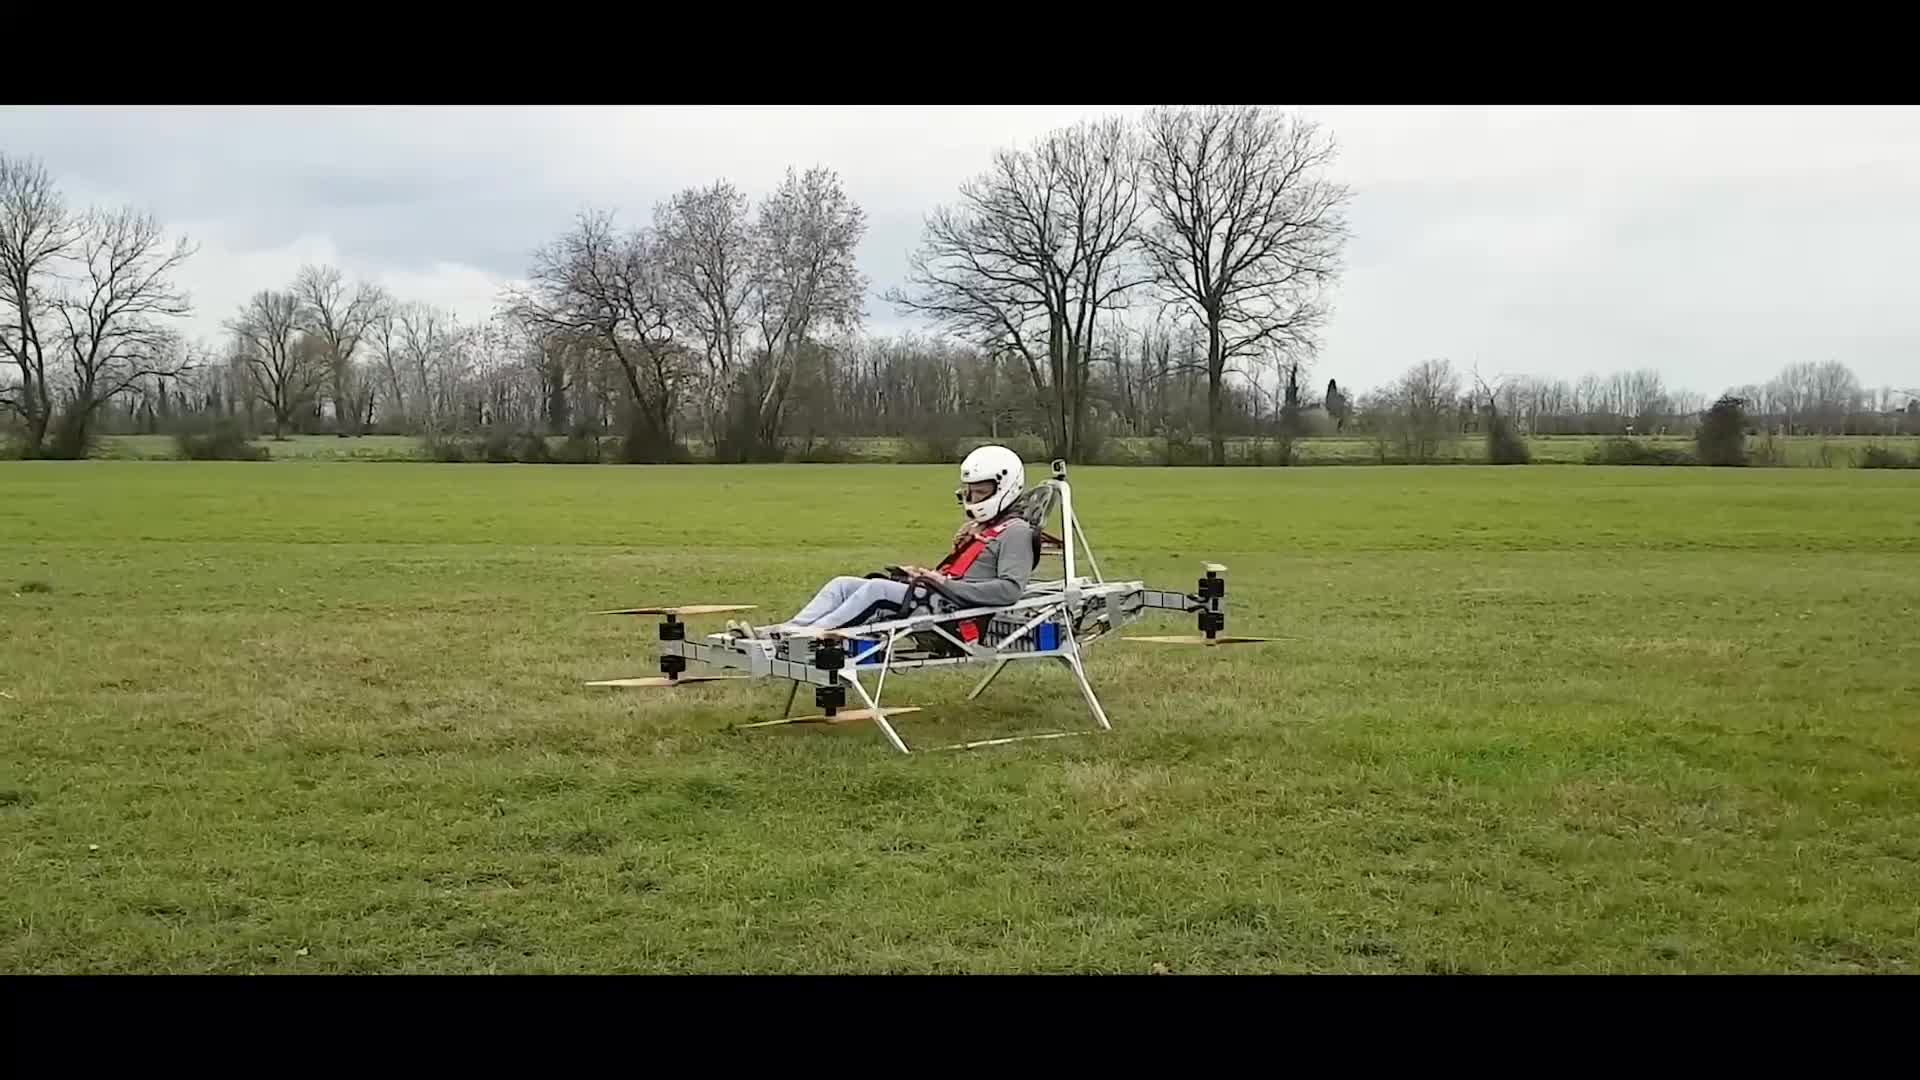 World-first flying bike that can reach speeds of 63mph now available to buy